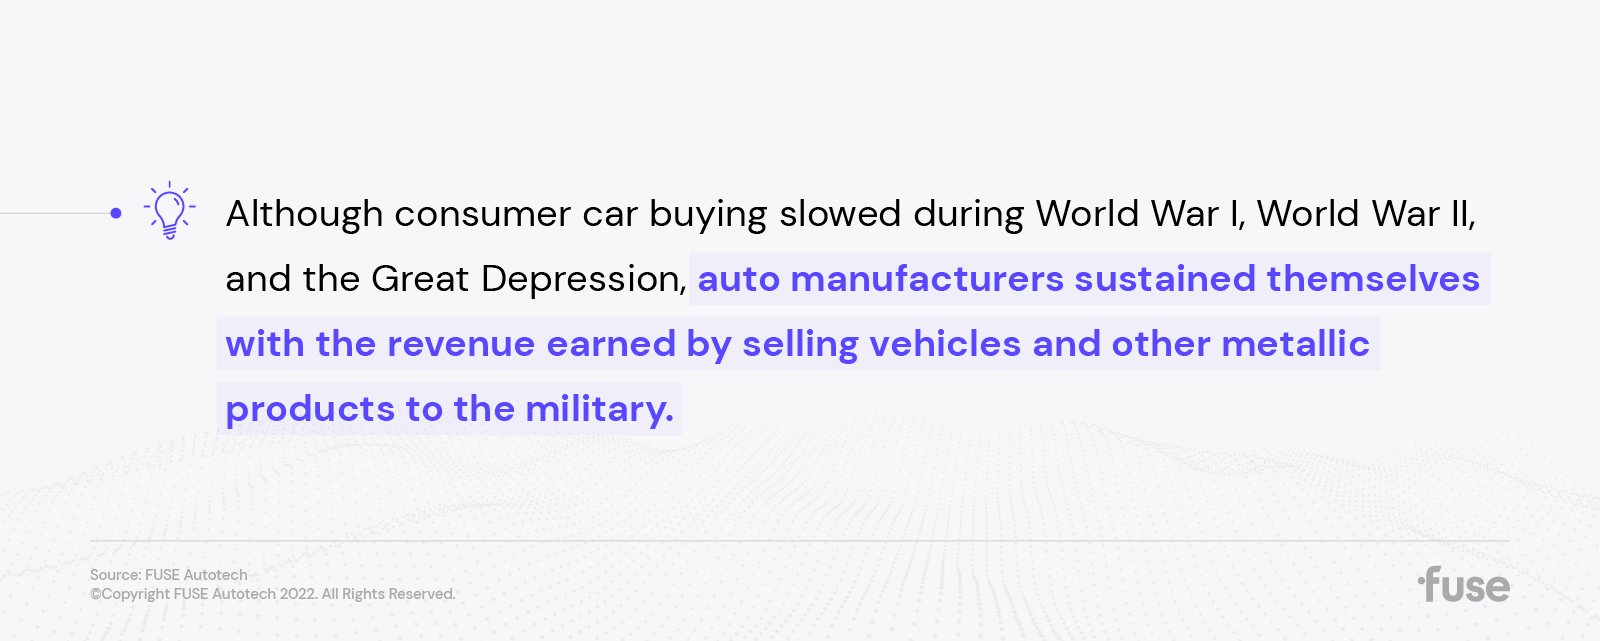 Although consumer car buying slowed during World War I, World War II, and the Great Depression, Although consumer car buying slowed during this time, auto manufacturers sustained themselves with the revenue earned by selling vehicles and other metallic products to the military. 